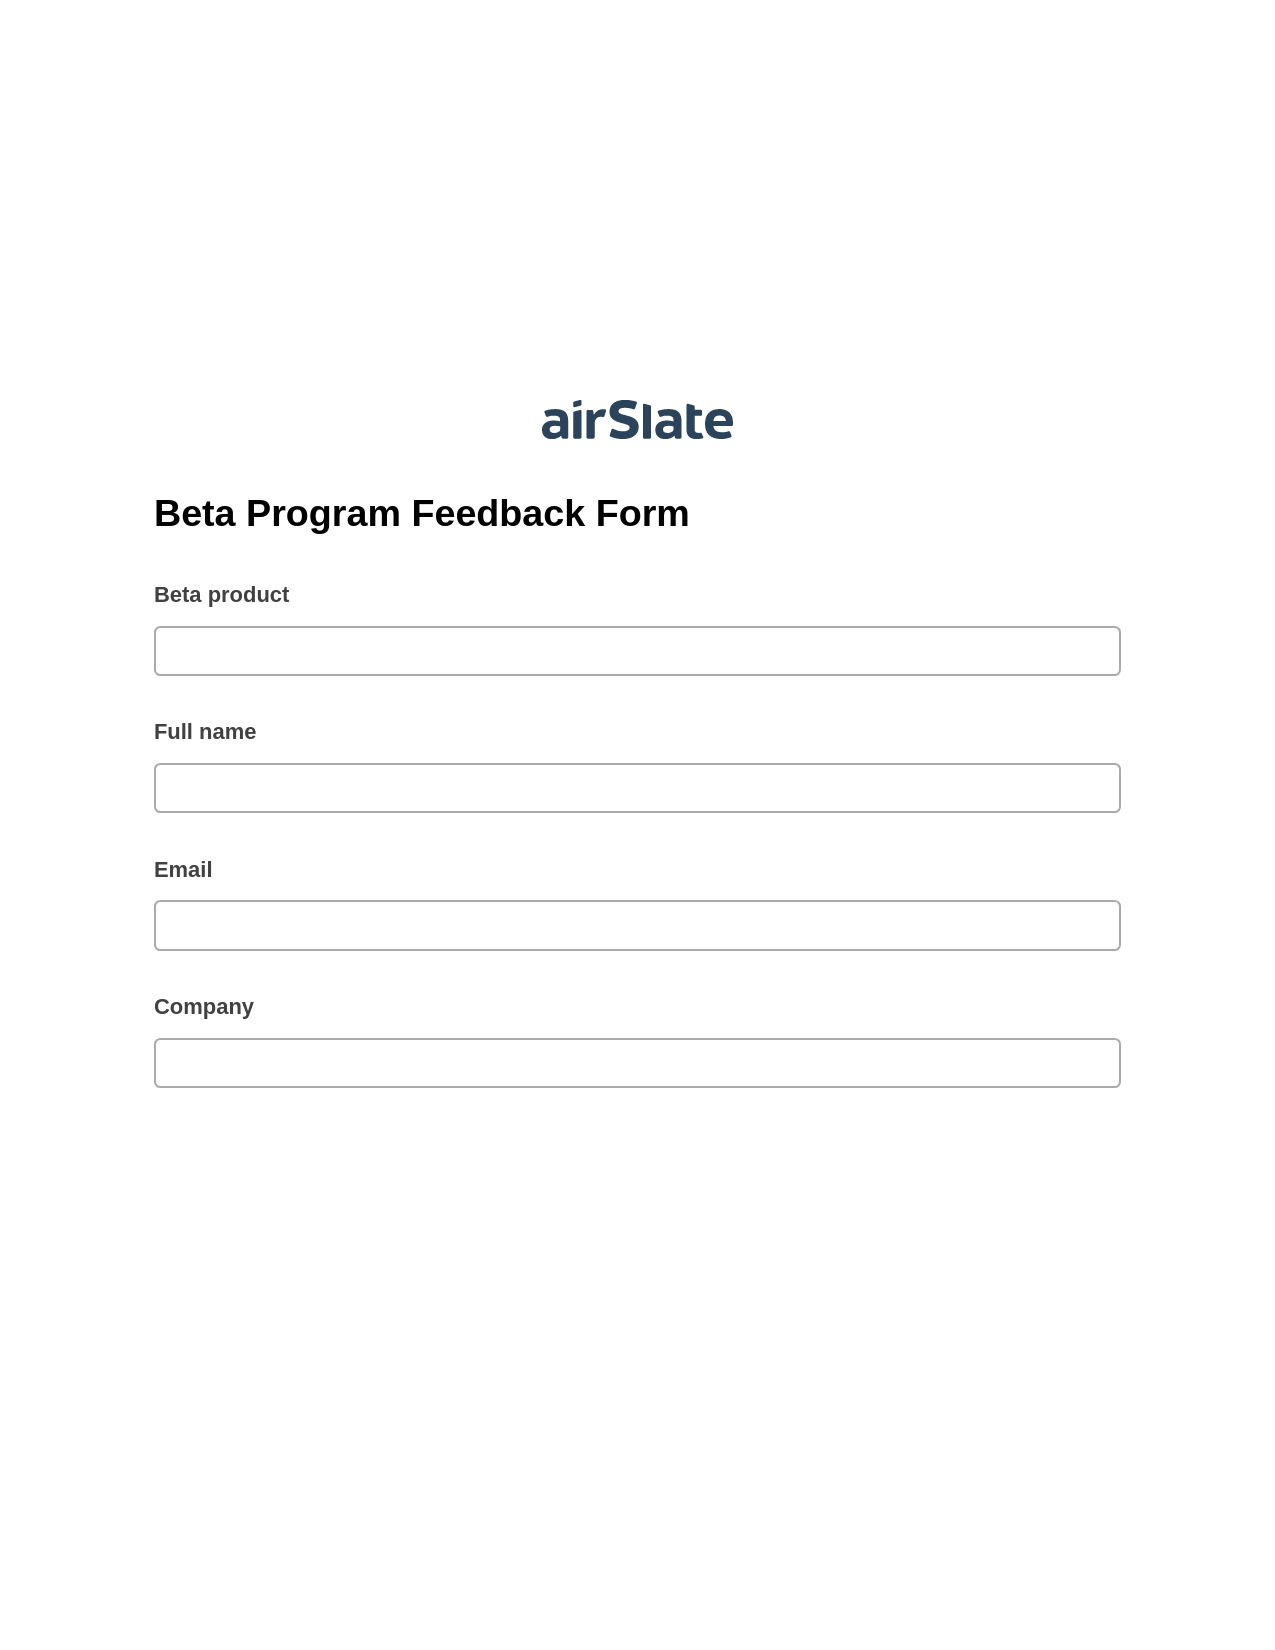 Multirole Beta Program Feedback Form Pre-fill from CSV File Bot, Send a Slate to MS Dynamics 365 Contact Bot, Export to Excel 365 Bot